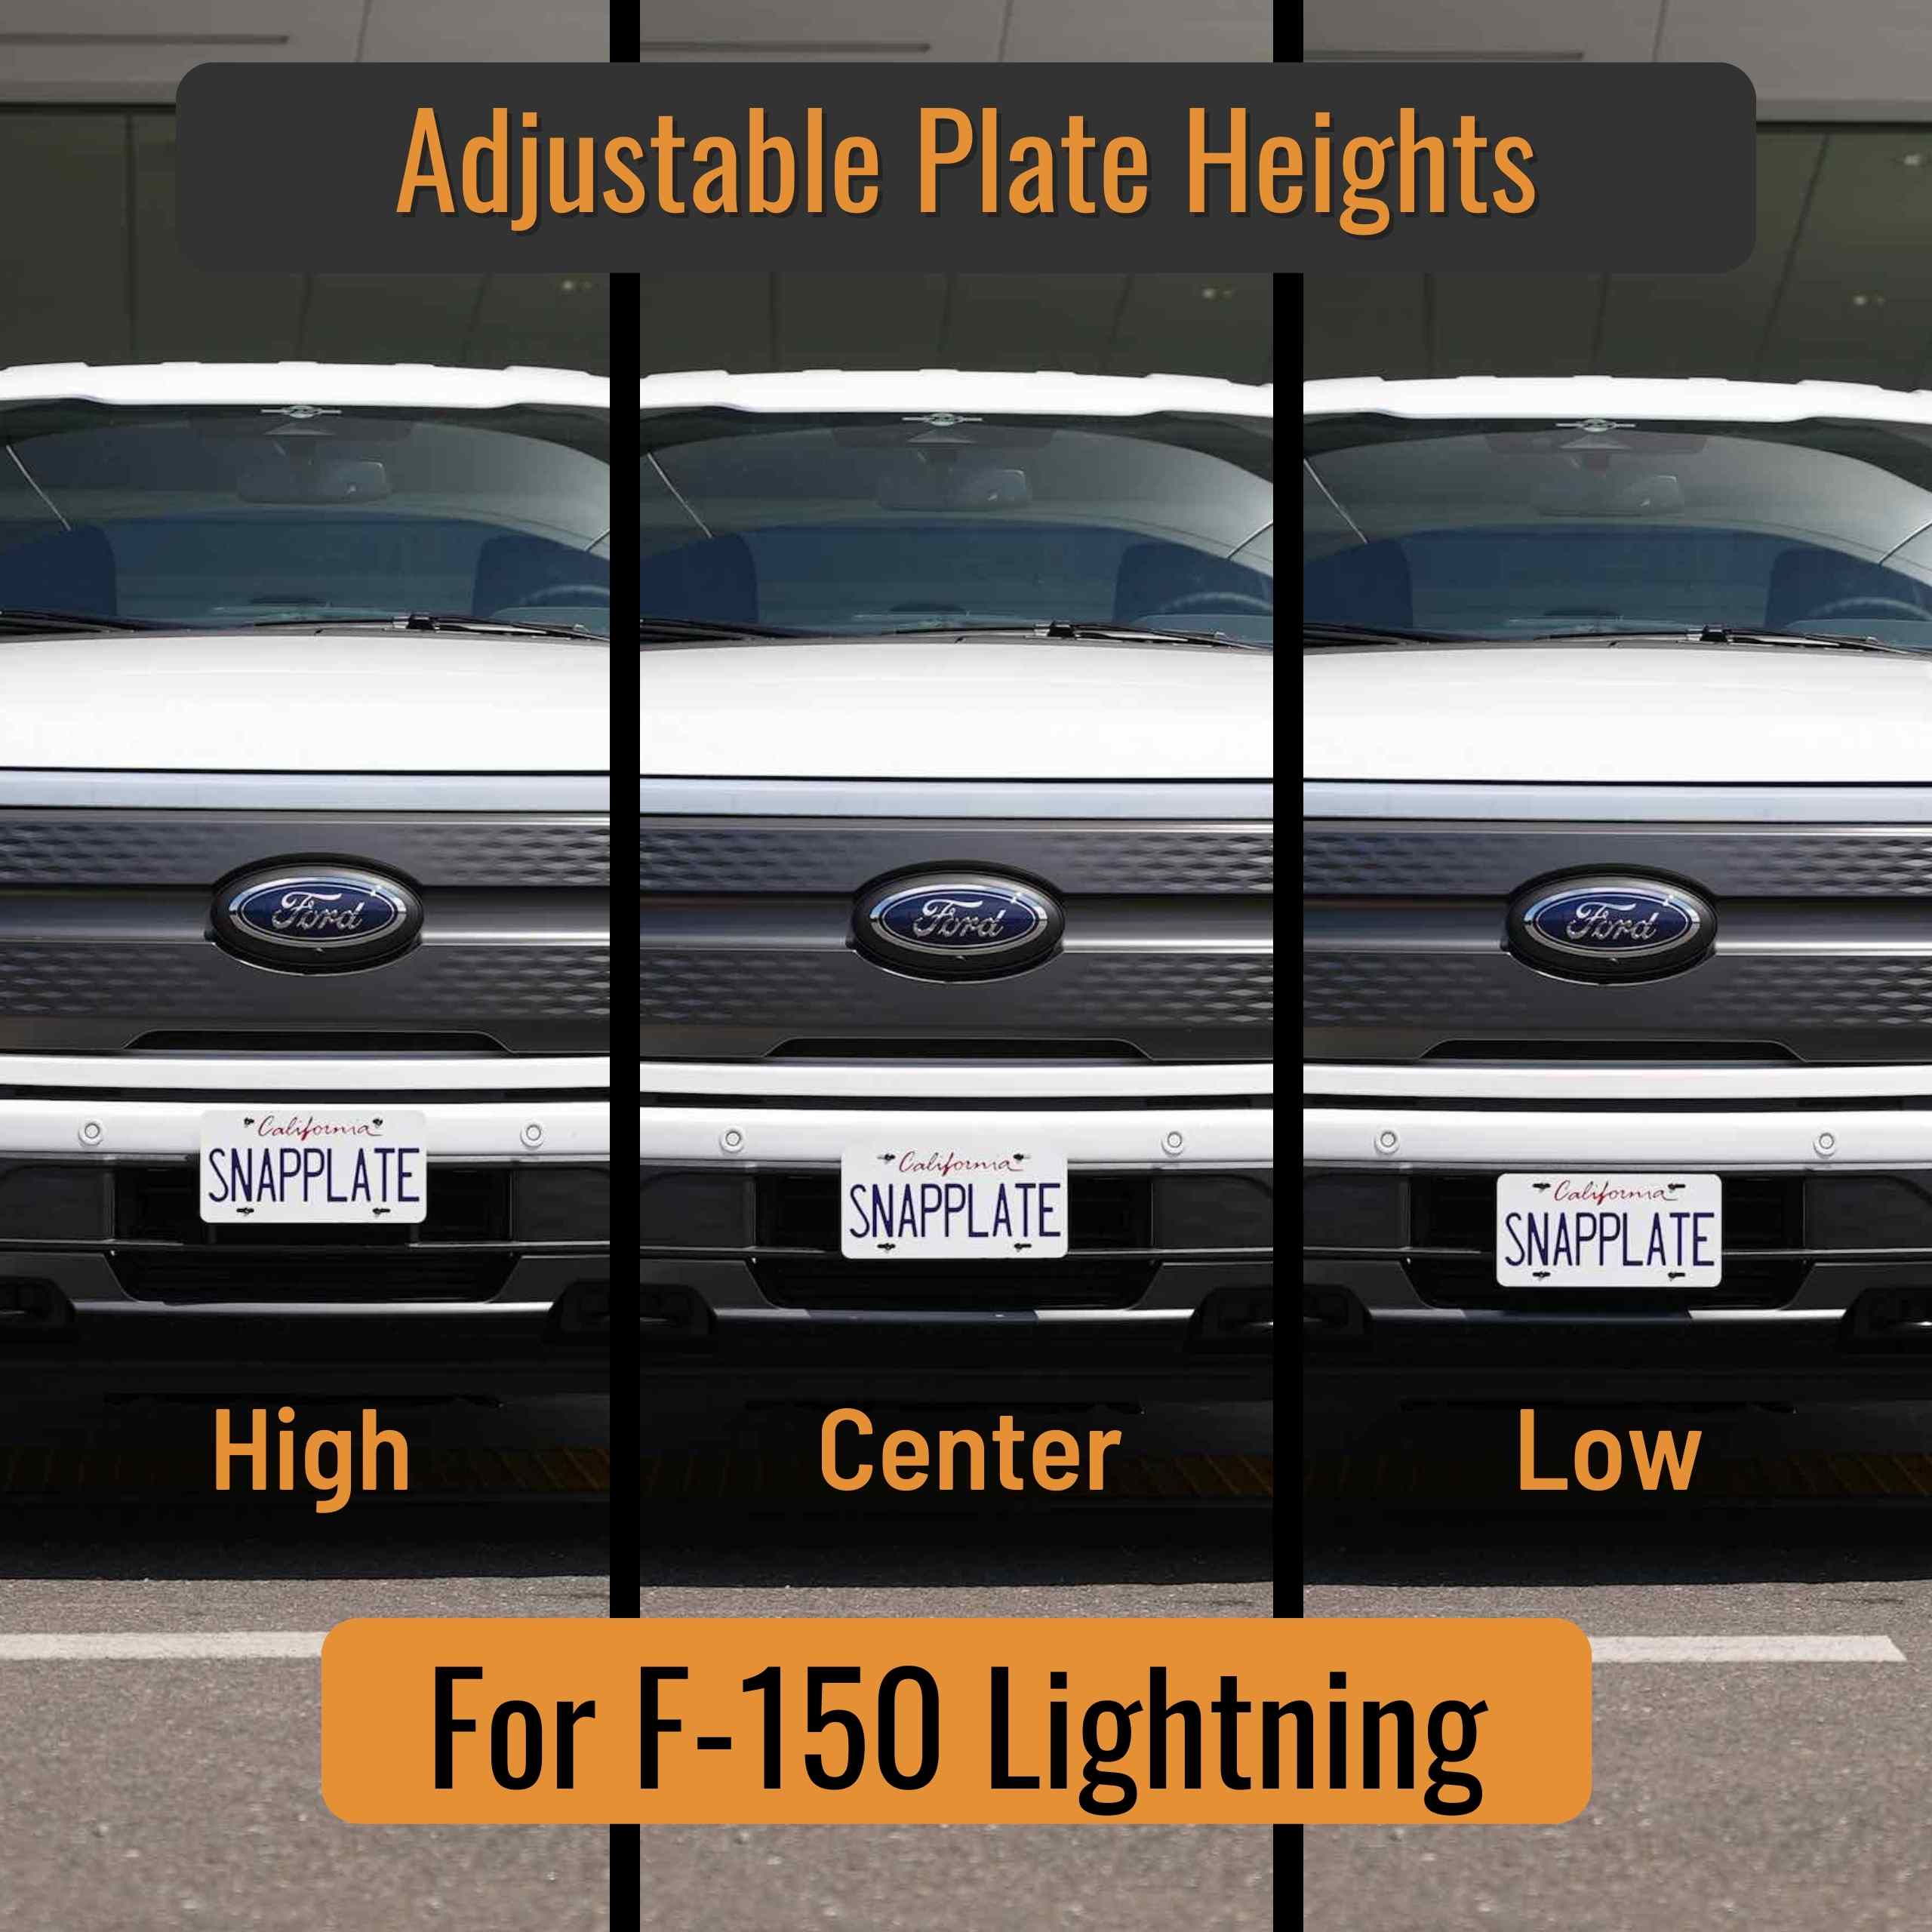 SnapPlate No-drill License Plate Bracket for Ford F-150 Lightning EV